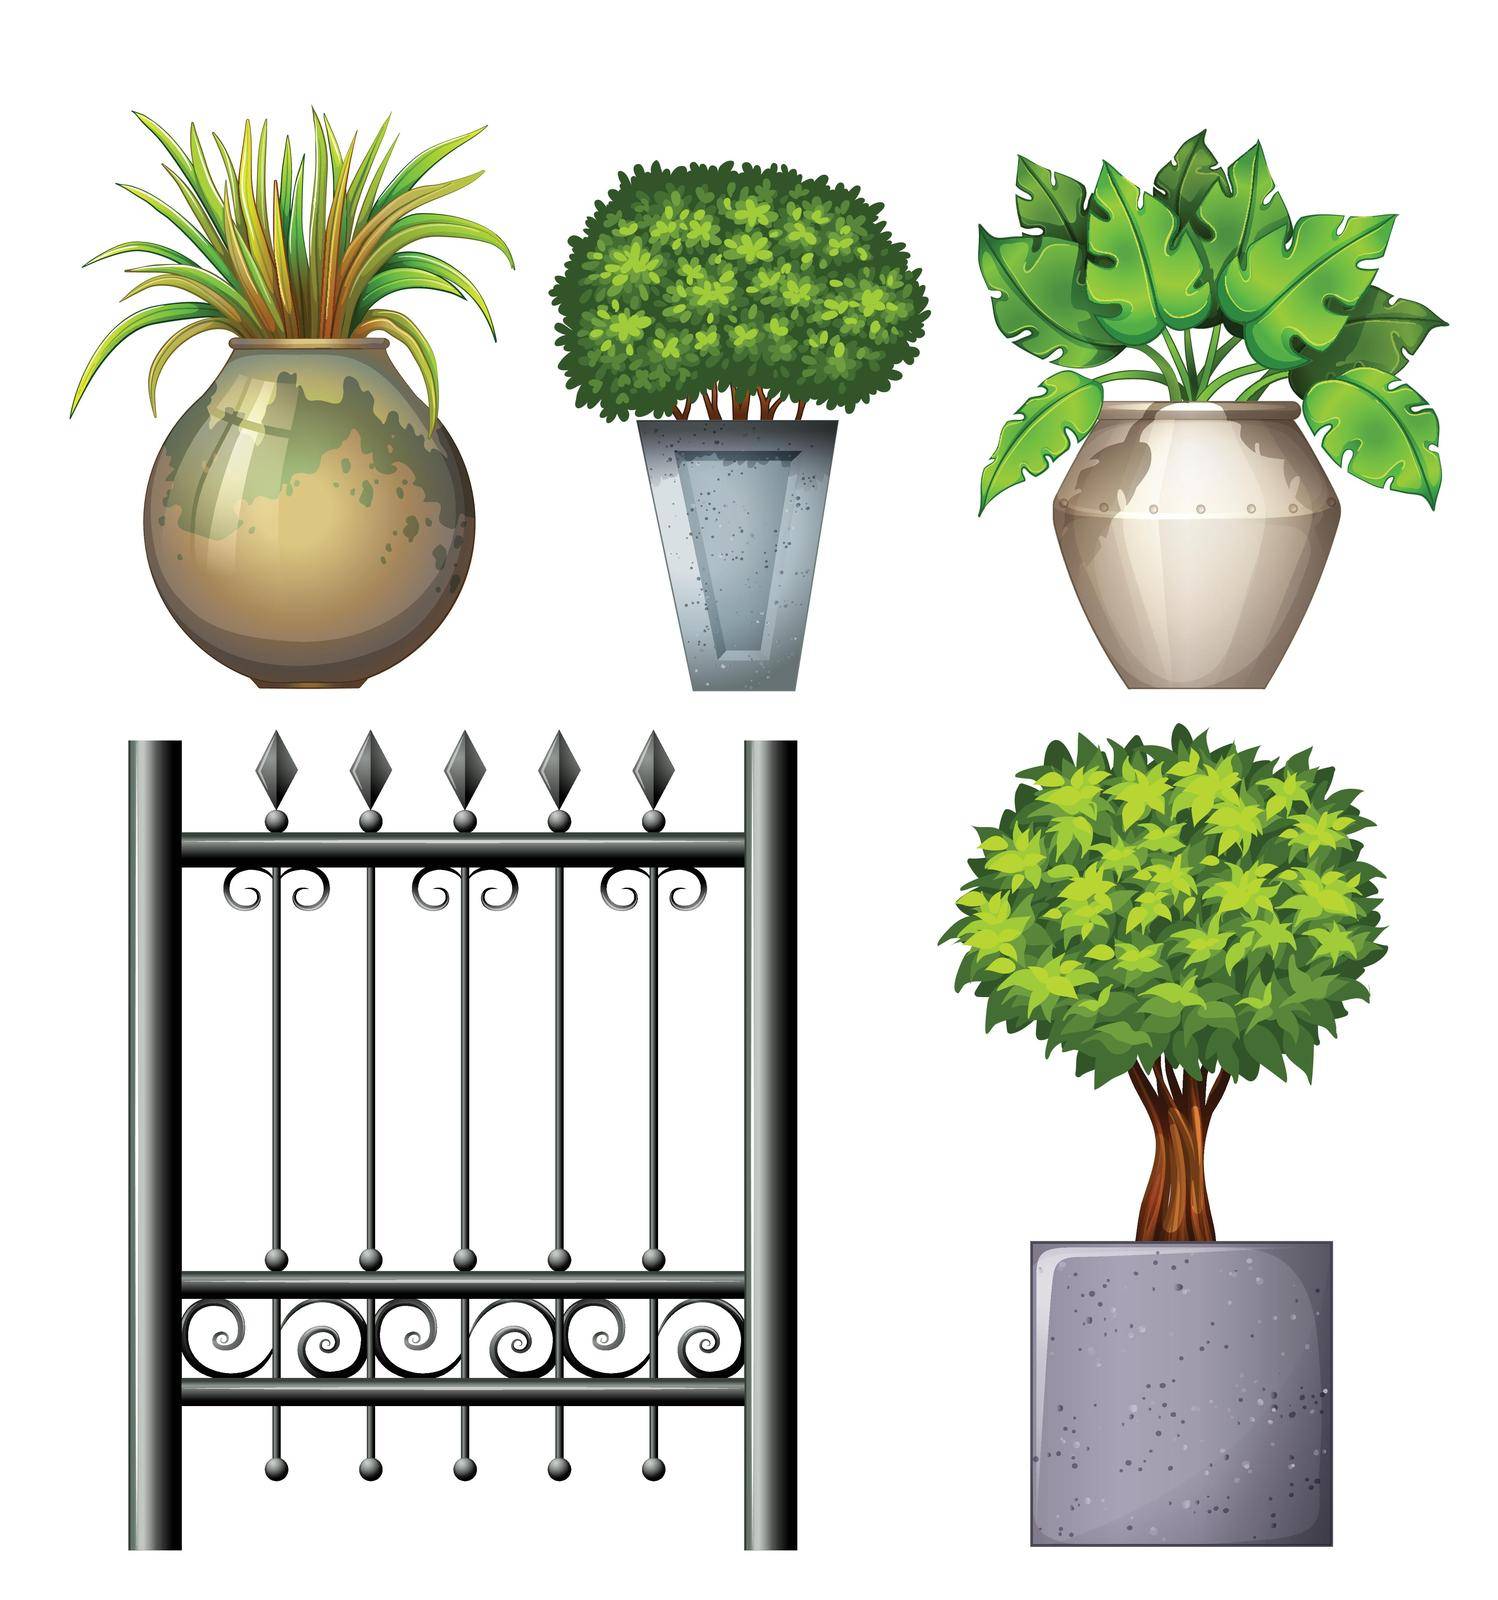 Illustration of a steel gate and potted plants on a white background